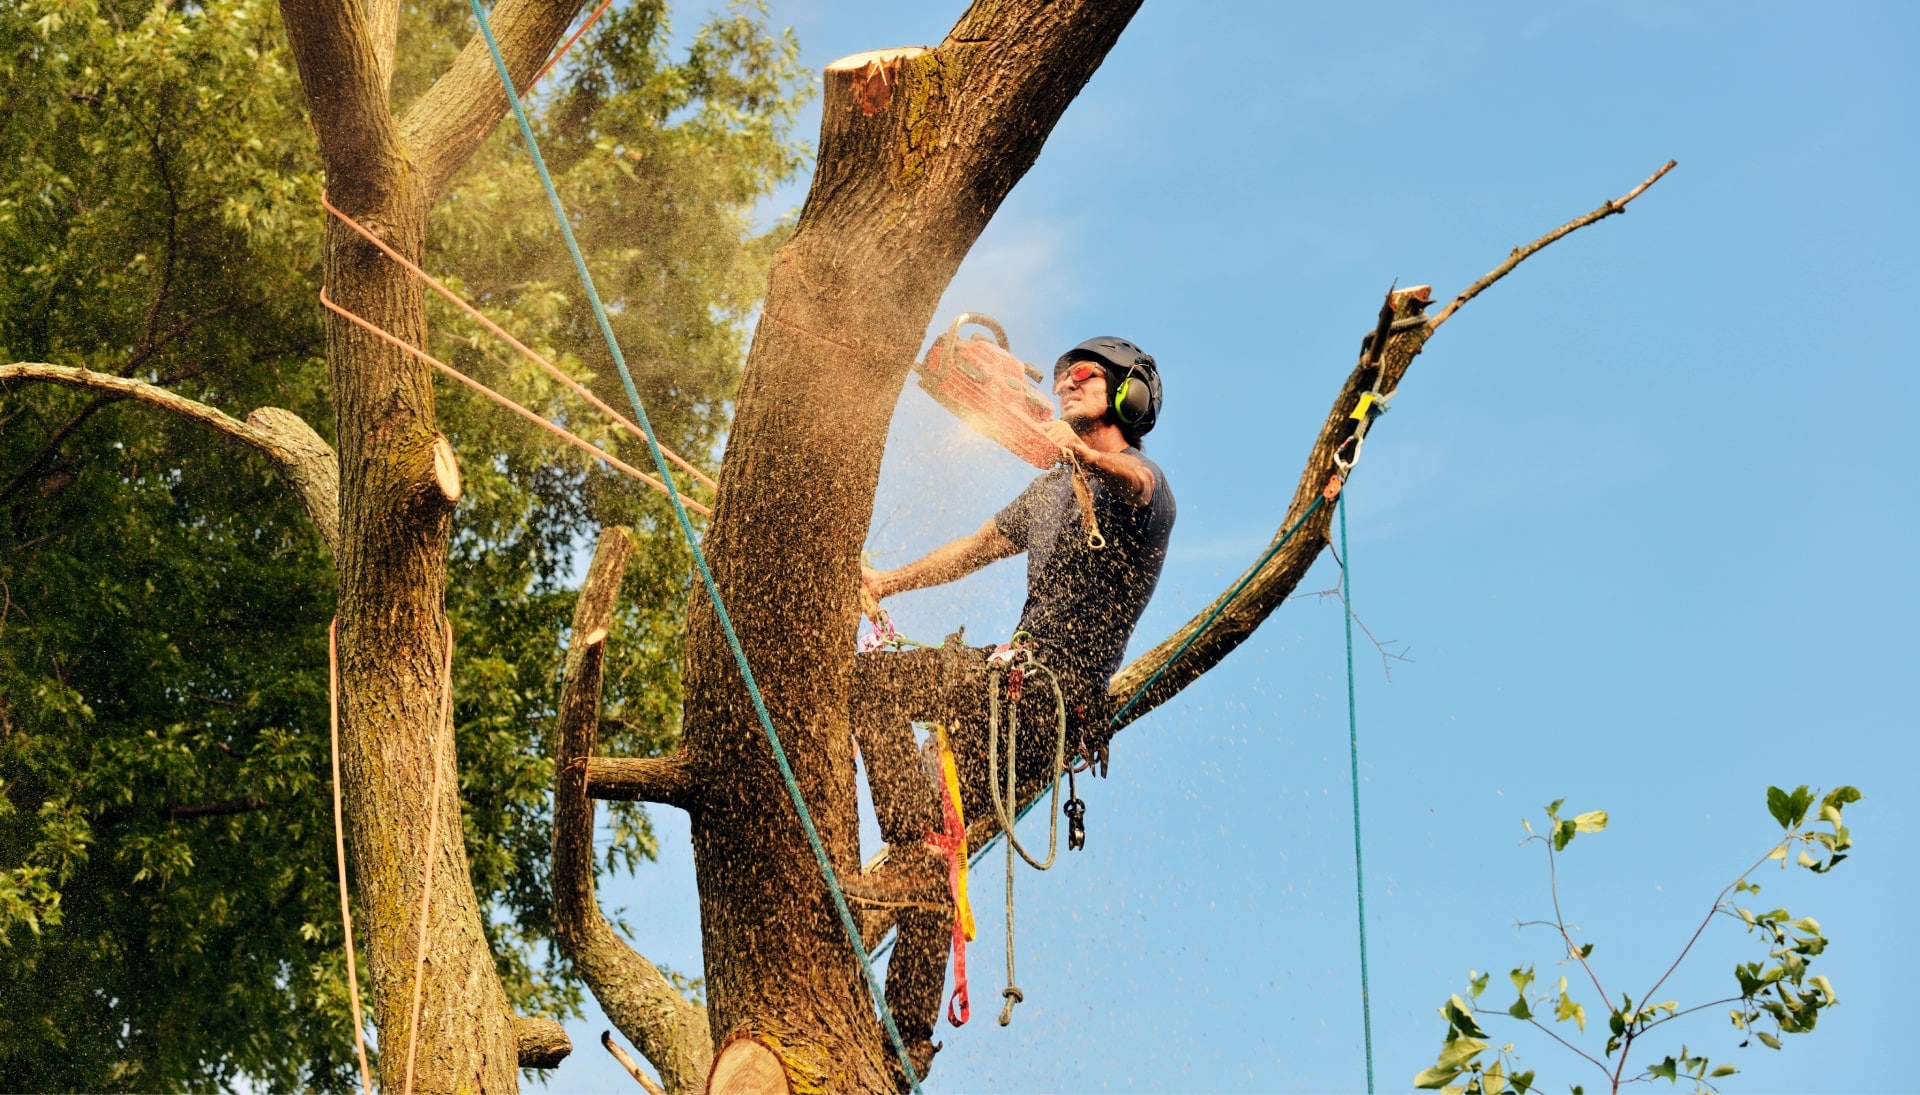 Canton tree removal experts solve tree issues.